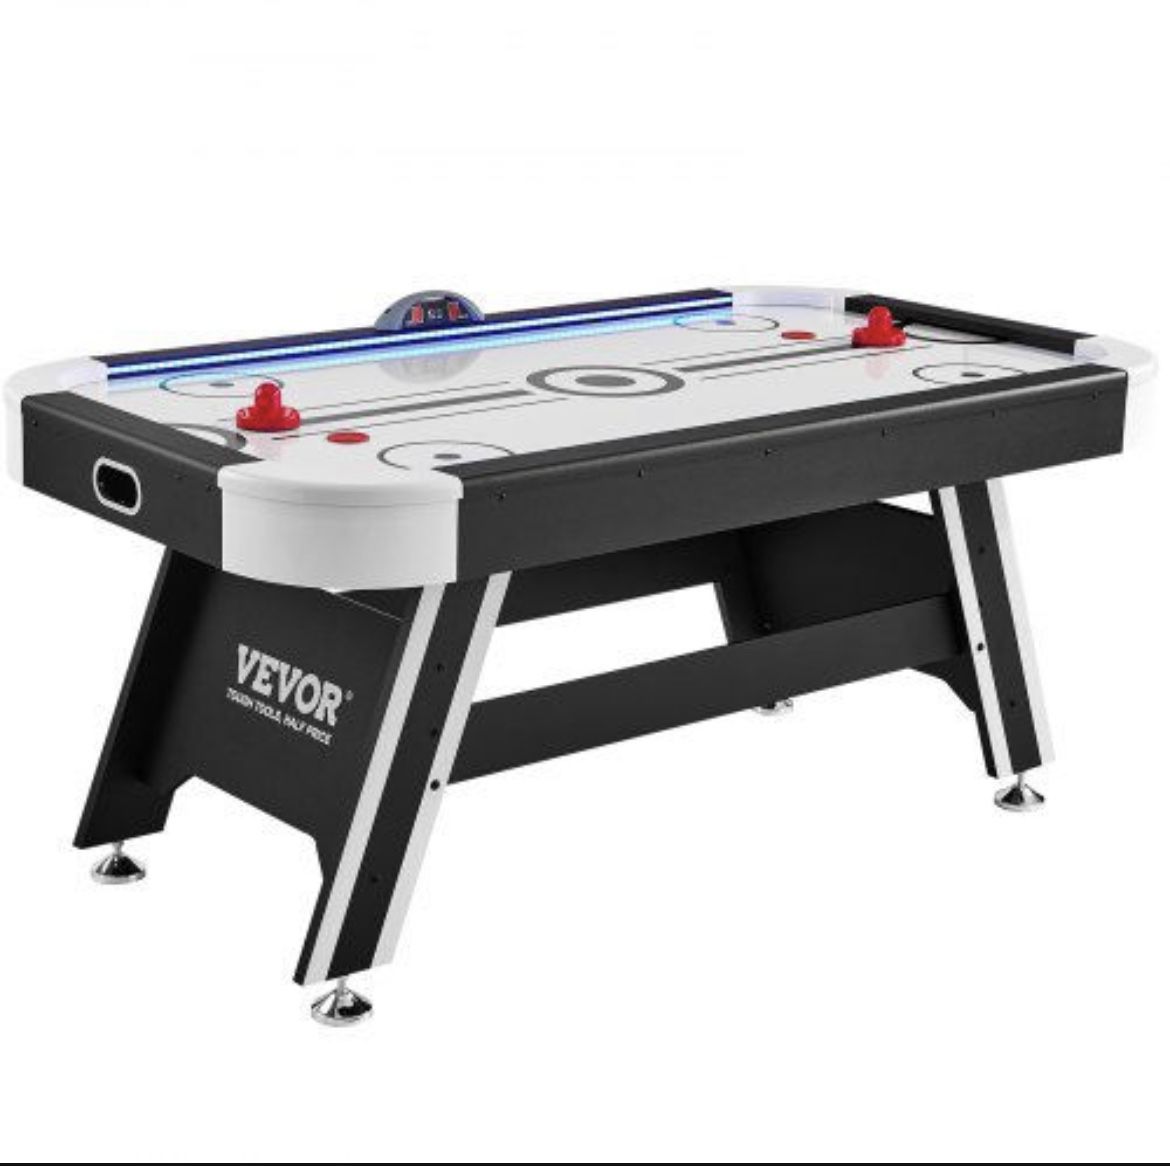 VEVOR Air-Powered Hockey Table, 89" Indoor Hockey Table for Kids and Adults, LED Sports Hockey Game with 2 Pucks, 2 Pushers, and Electronic Score Syst